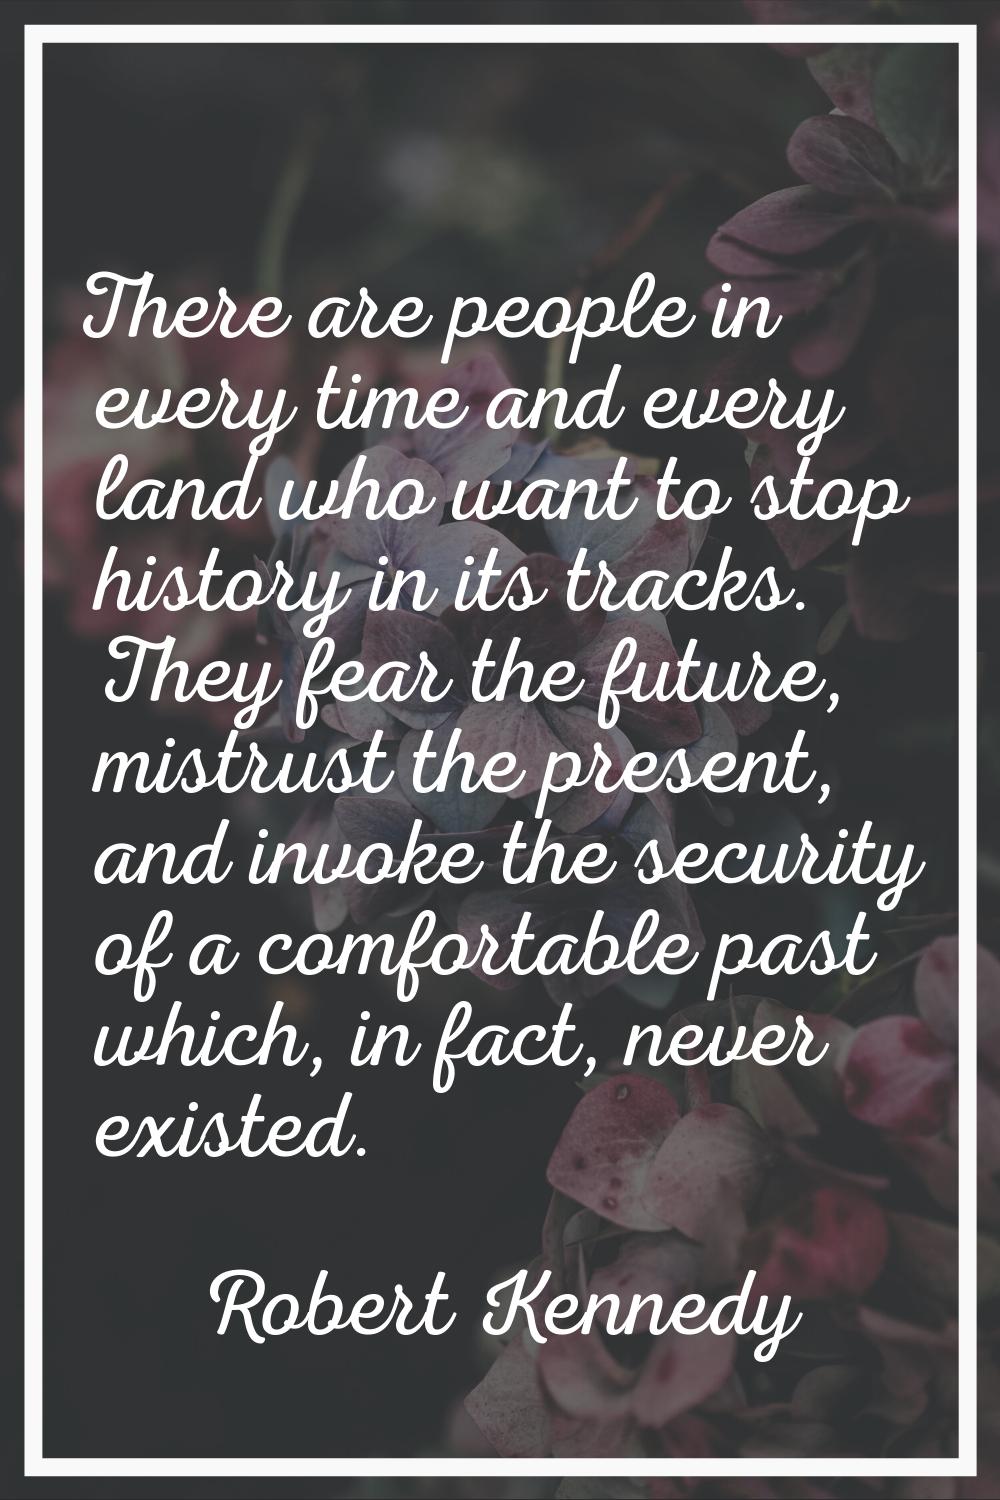 There are people in every time and every land who want to stop history in its tracks. They fear the